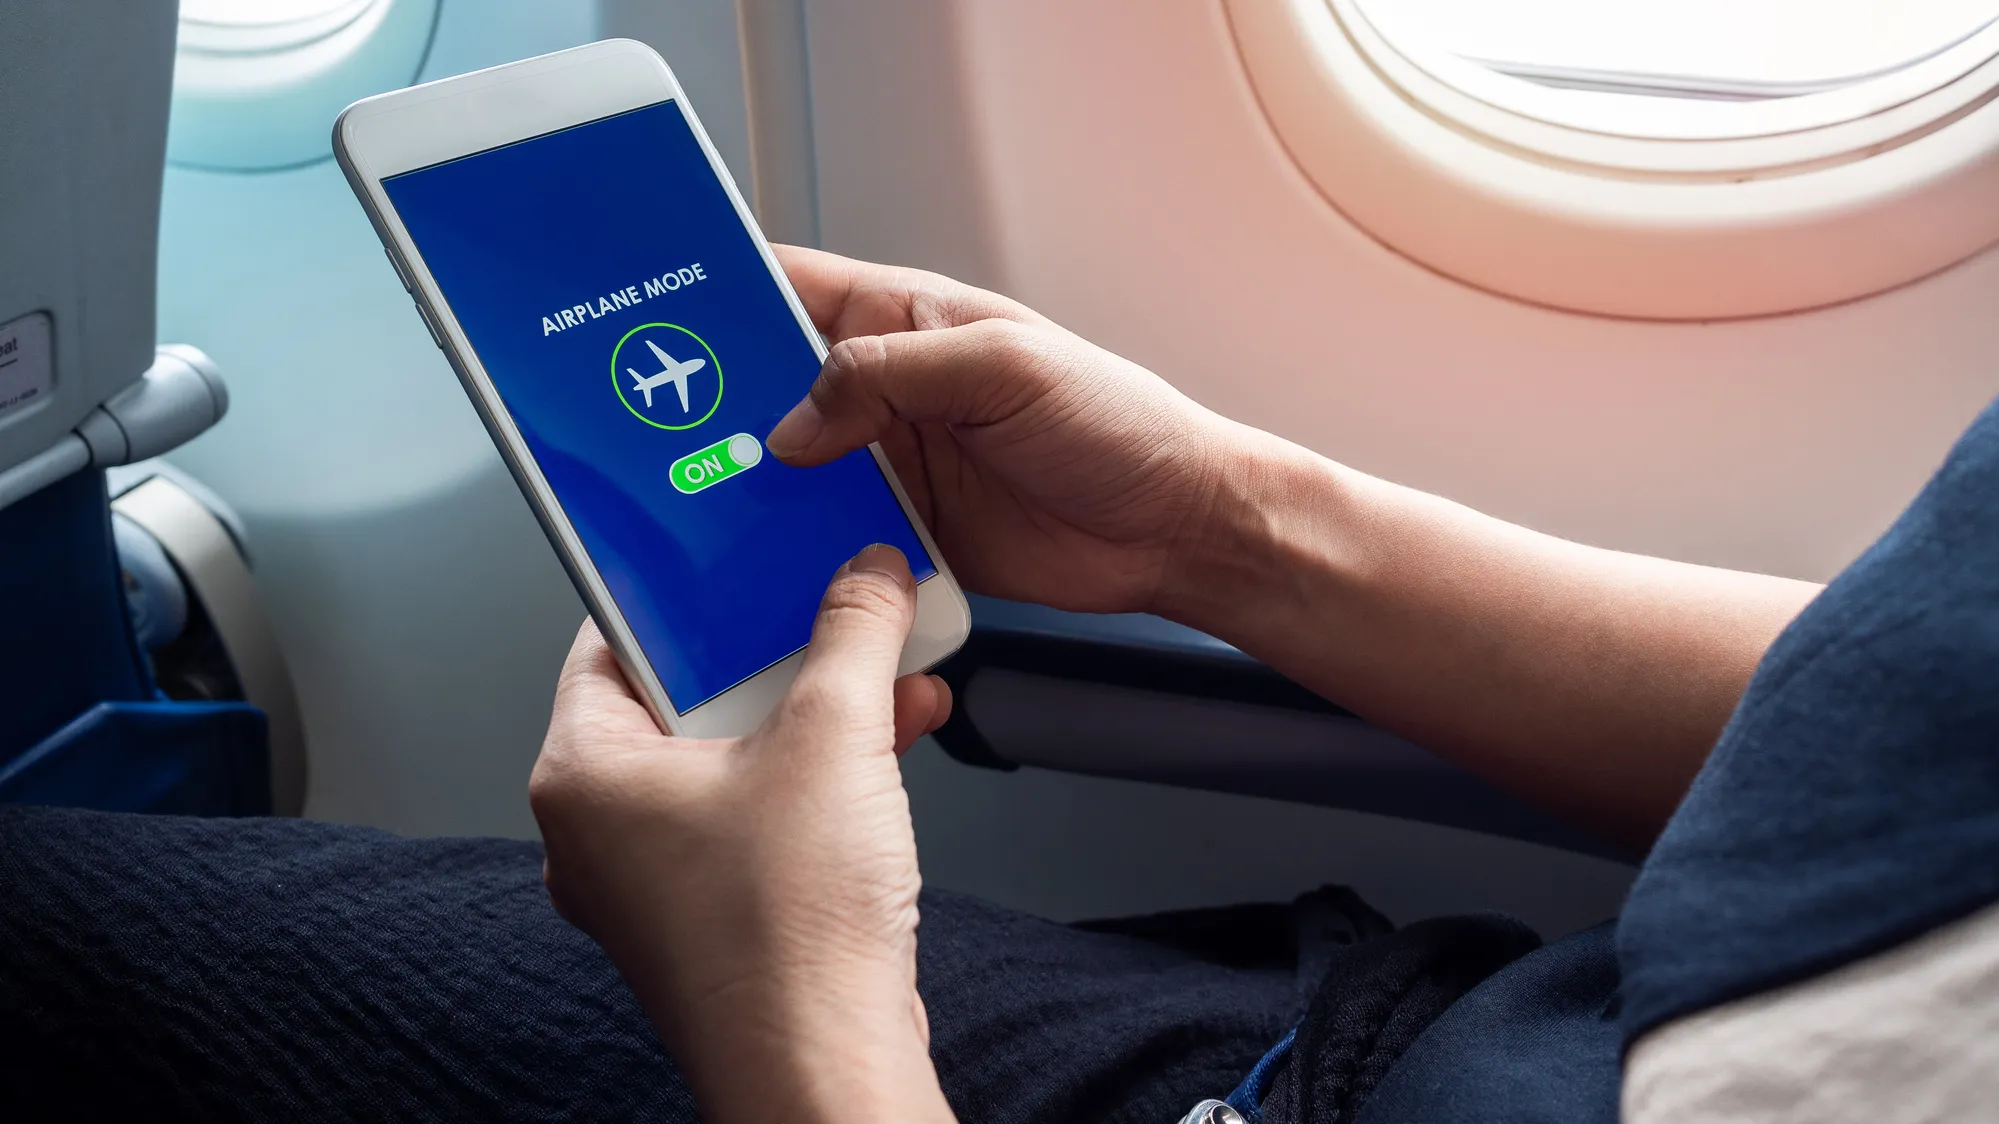 Google Developing New Android Feature That Auto Enables ‘Airplane Mode’ During Flights